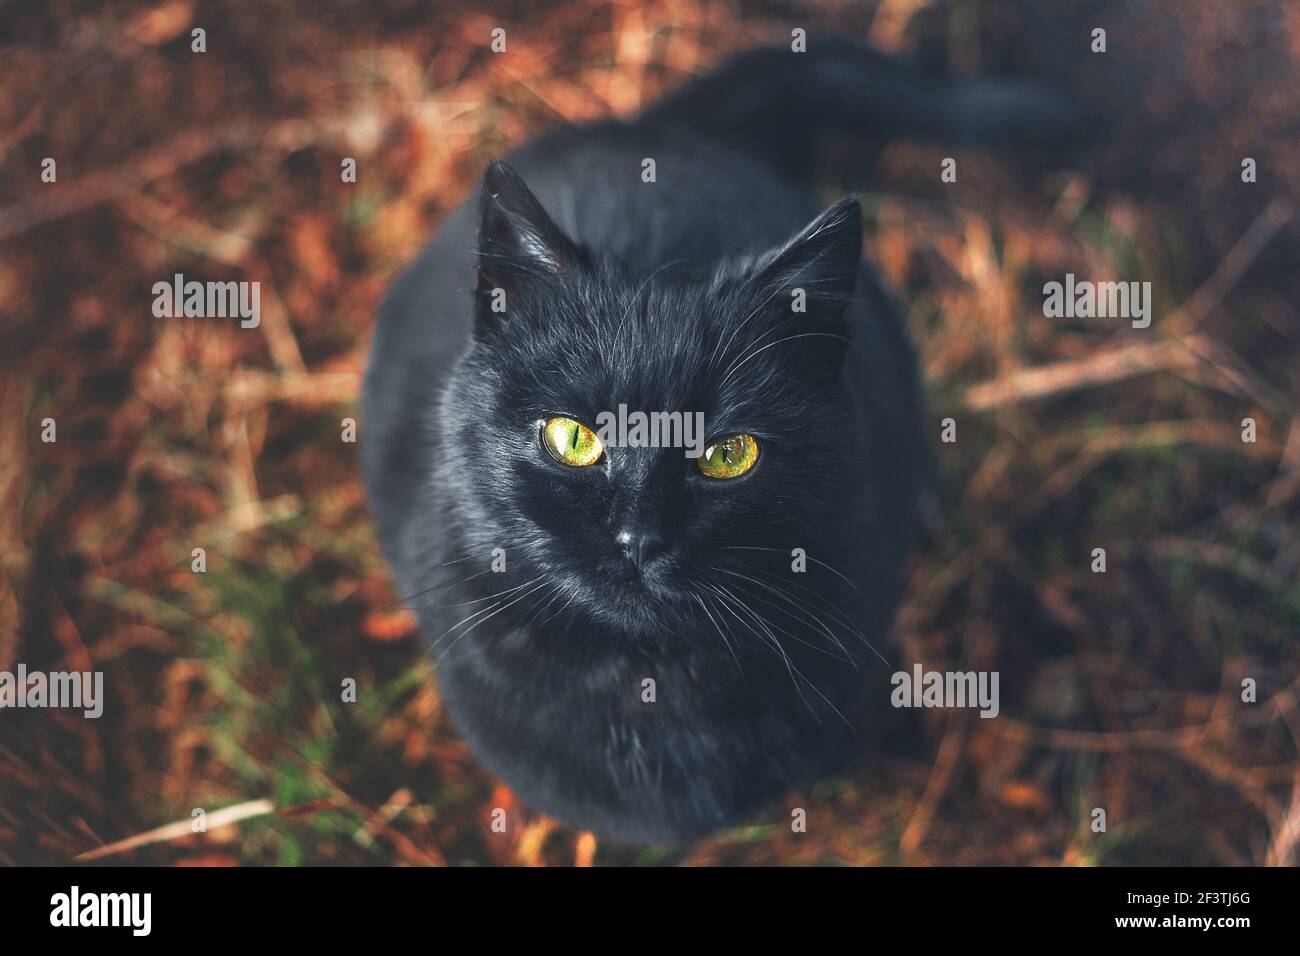 A black cat looks into the camera with bright yellow eyes.  Stock Photo